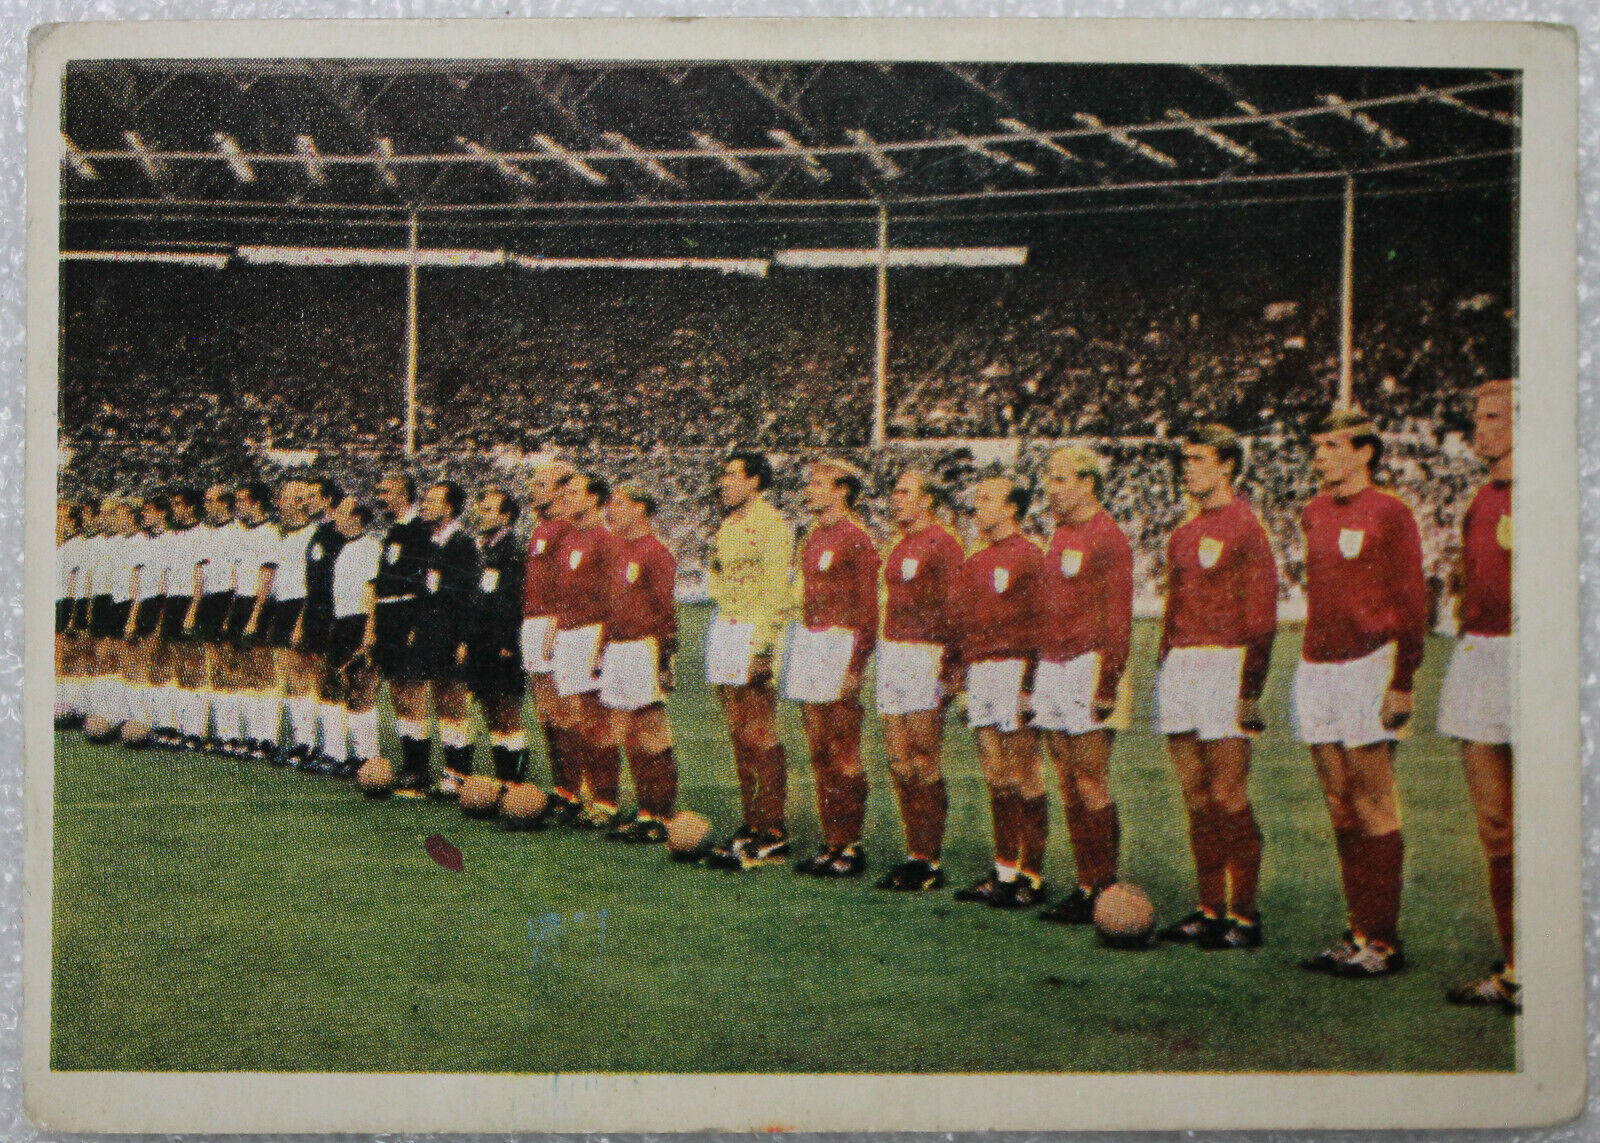 FOOTBALL KUNOLD PICTURE WM WC FINAL 1966 TEAMS ENGLAND THREE LIONS + W. GERMANY DFB